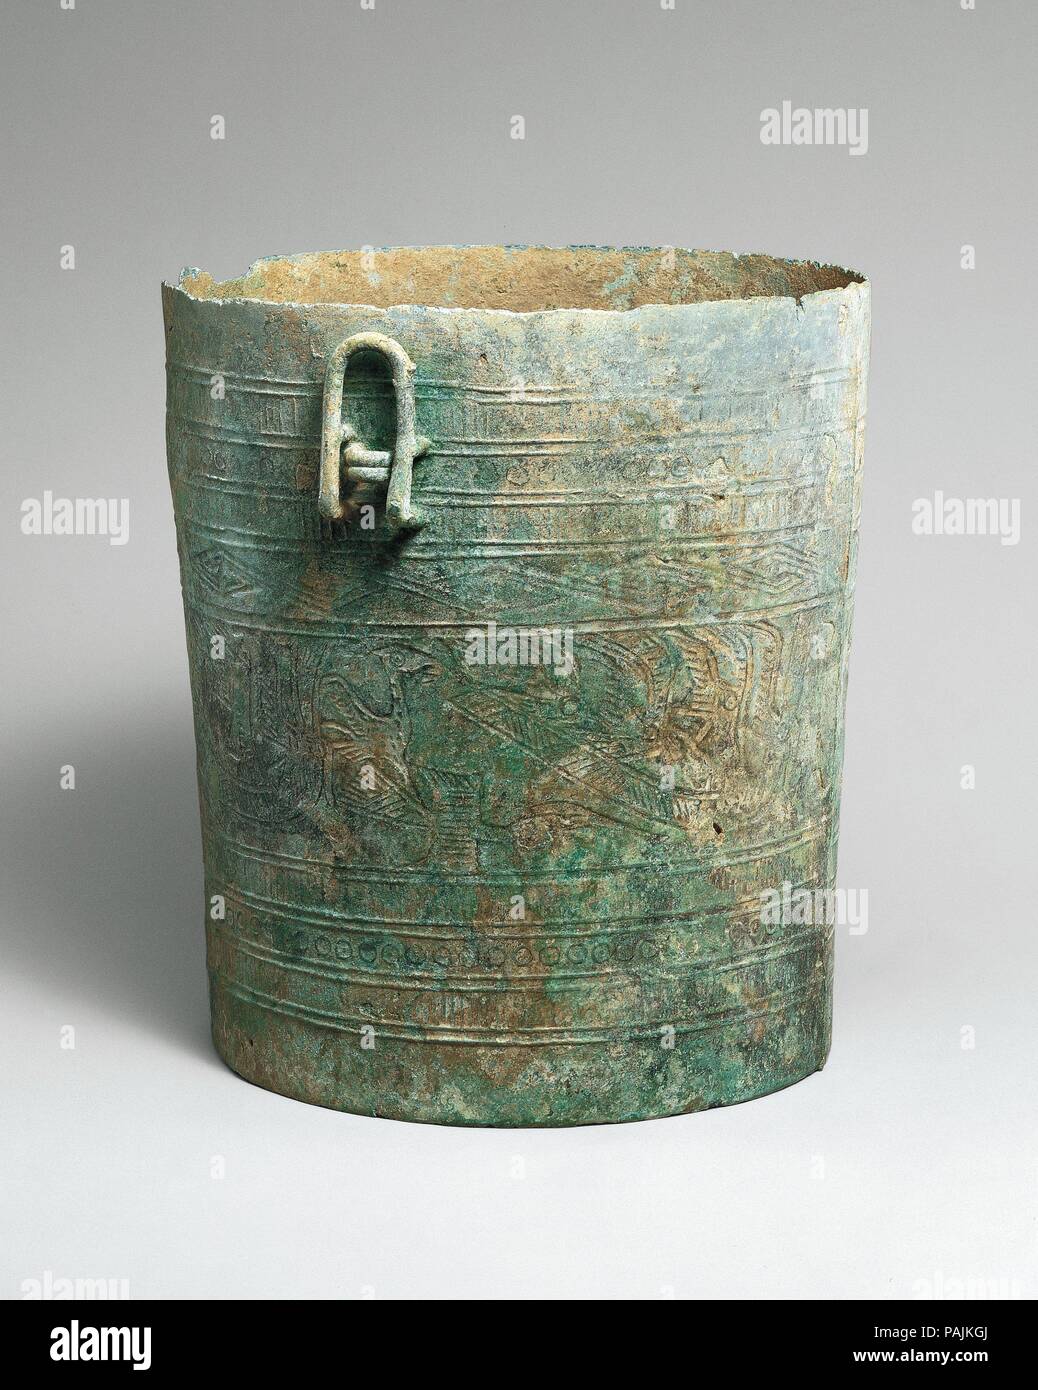 Situla with Design of Boats. Culture: Vietnam. Dimensions: H. 8 1/4 in. (21 cm). Date: ca. 500 B.C.-A.D. 300.  Axes, situlae, and drums play an important role in Vietnam's Dongson culture named after a site located on the coastline to the south of present-day Hanoi that was first excavated in 1924. The four long boats with seated warriors in the central horizontal band of this bucket shaped vessel, common images in the art of the Dongson culture, are also depicted, albeit more summarily, on the sides on the bronze model of a drum in this case. There had been much speculation regarding the mean Stock Photo